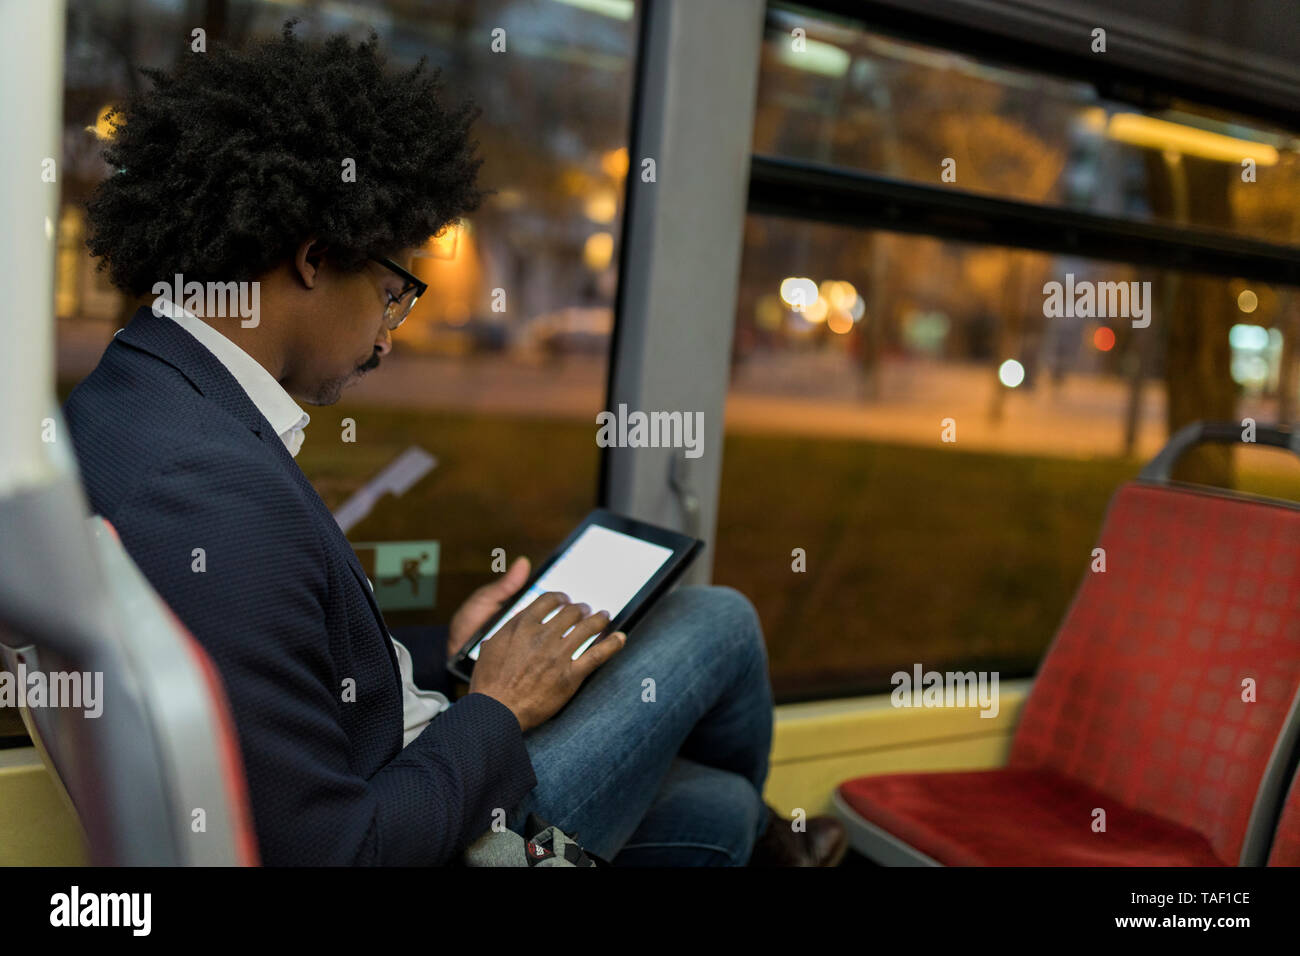 Spain, Barcelona, businessman in a tram at night using tablet Stock Photo